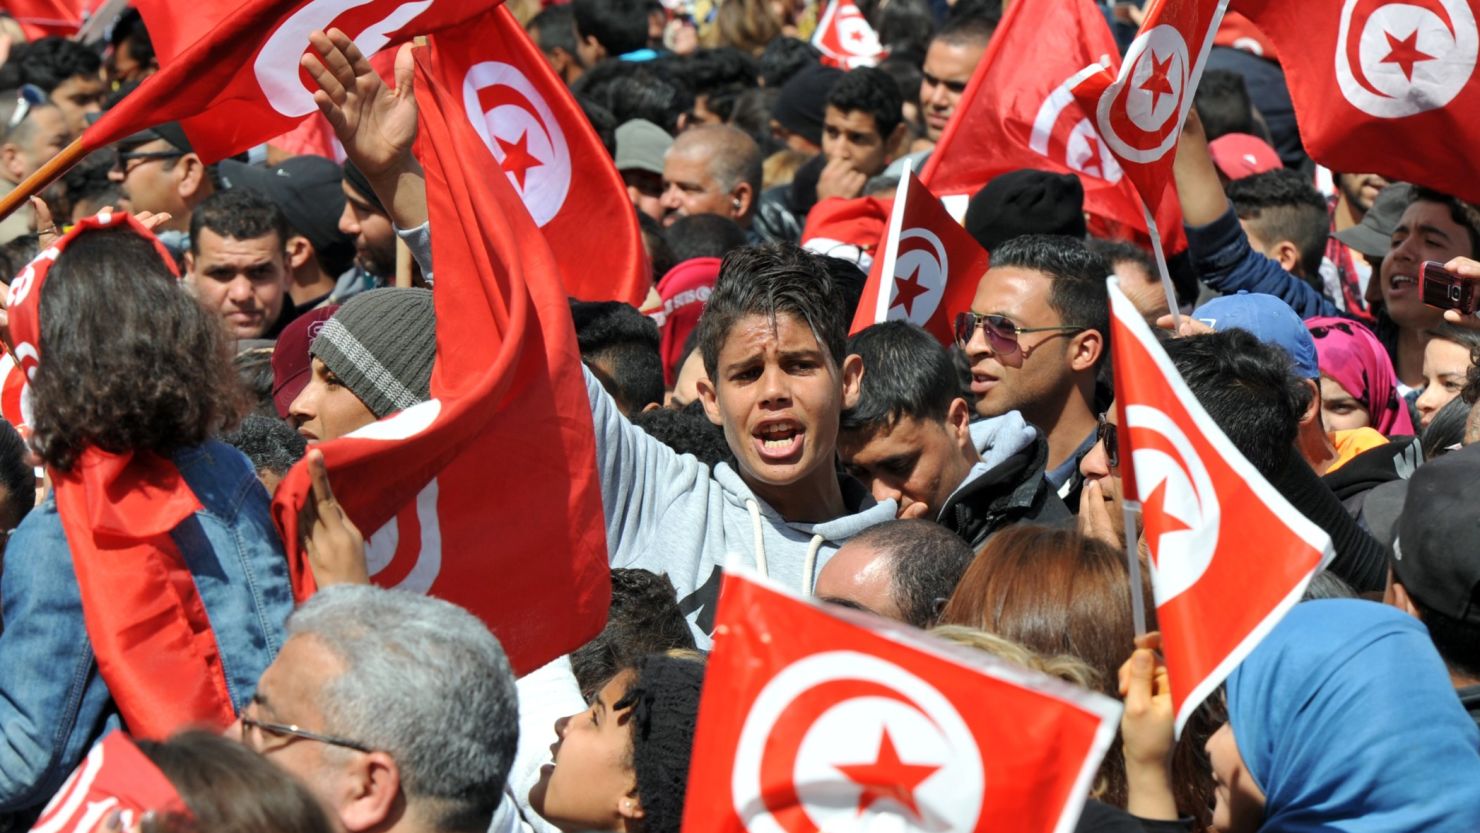 Tunisians wave their national flag and chant slogans during a protest against terrorism outside the Bardo Museum in Tunis on March 29, 2015.